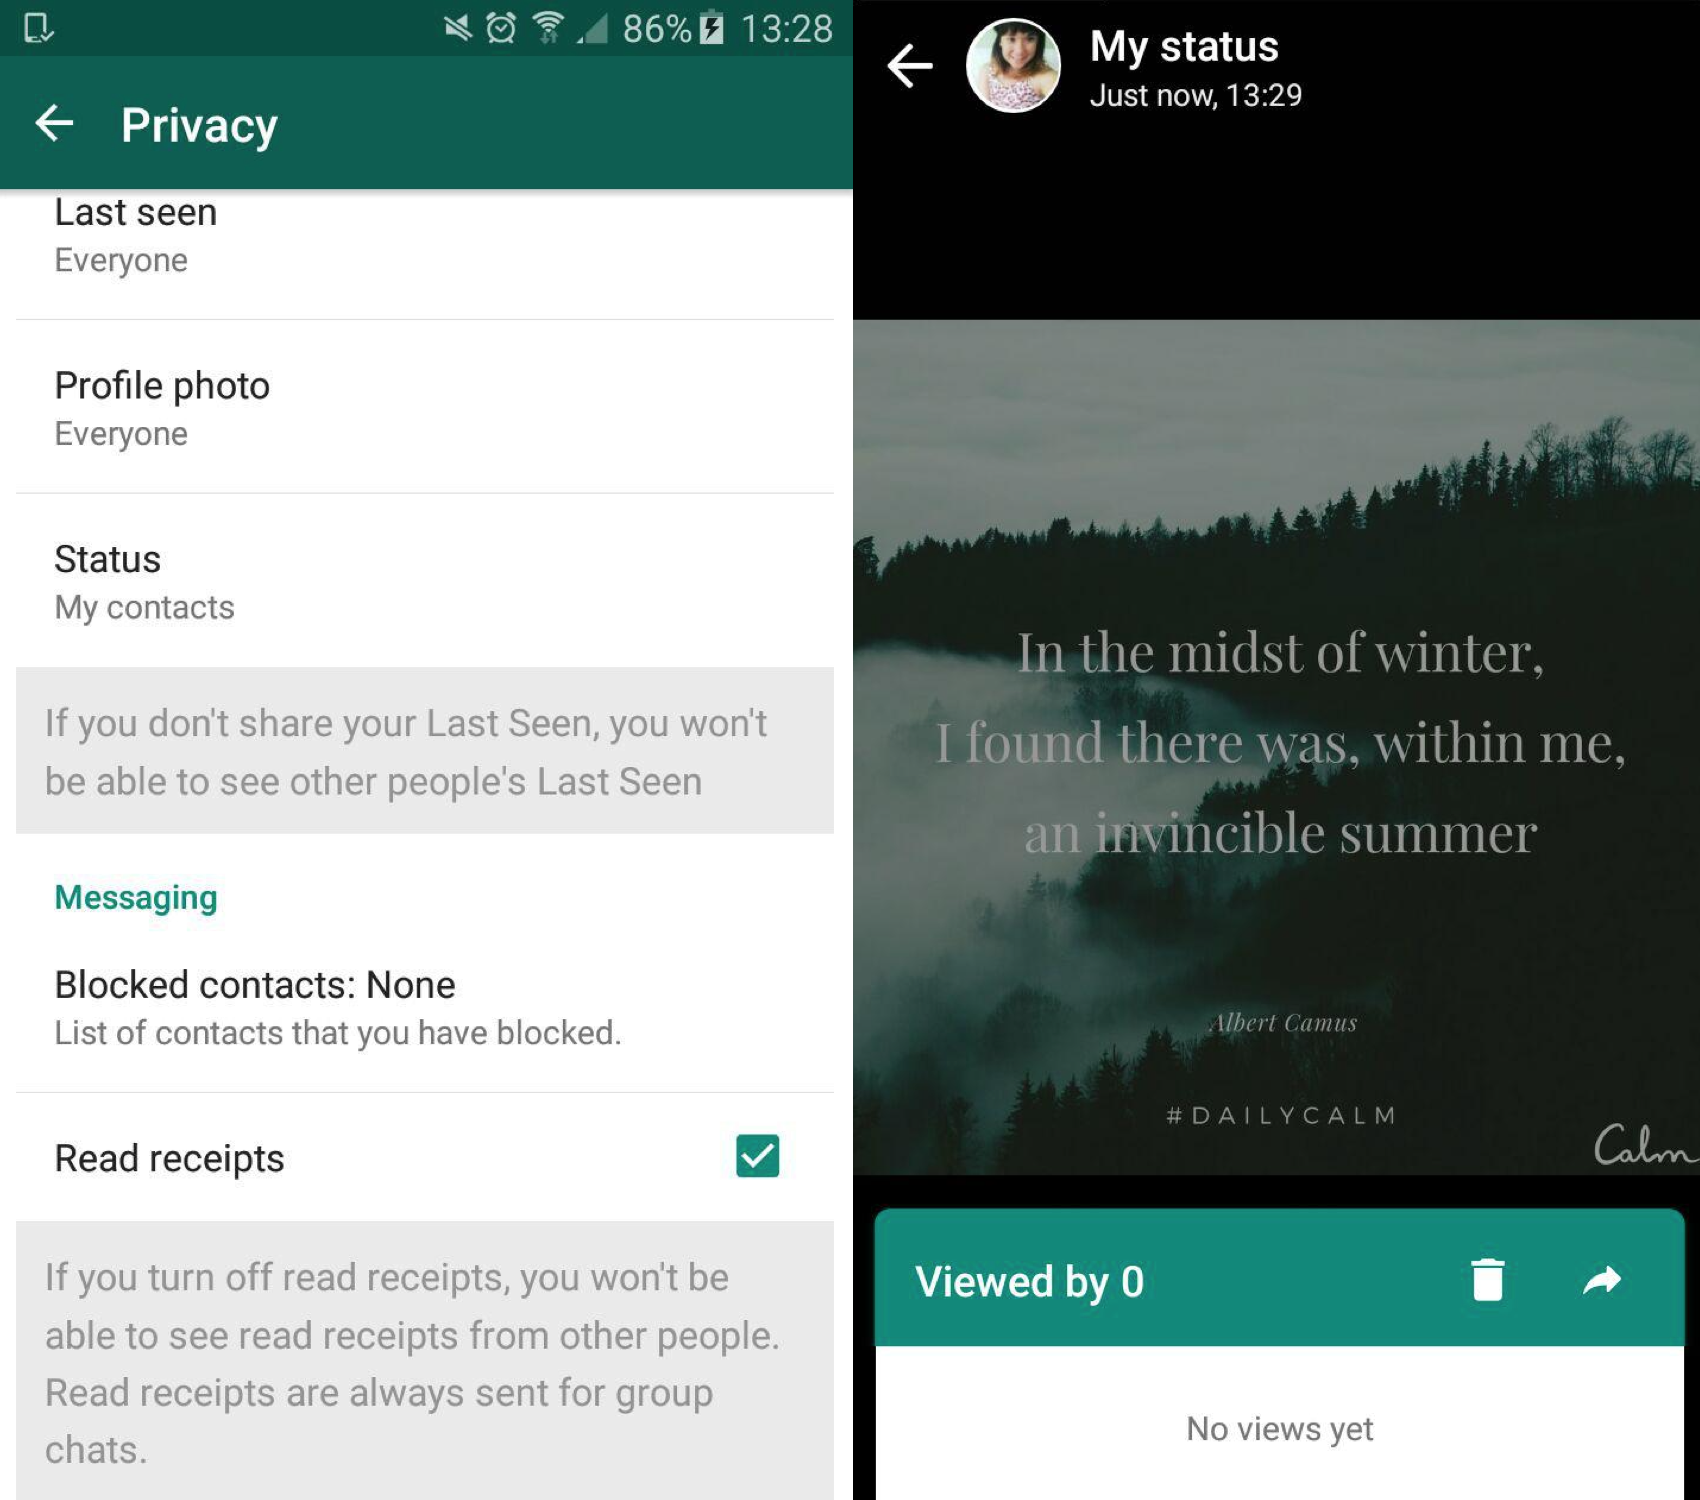 whats app status hide How to keep people from knowing you checked out their WhatsApp status